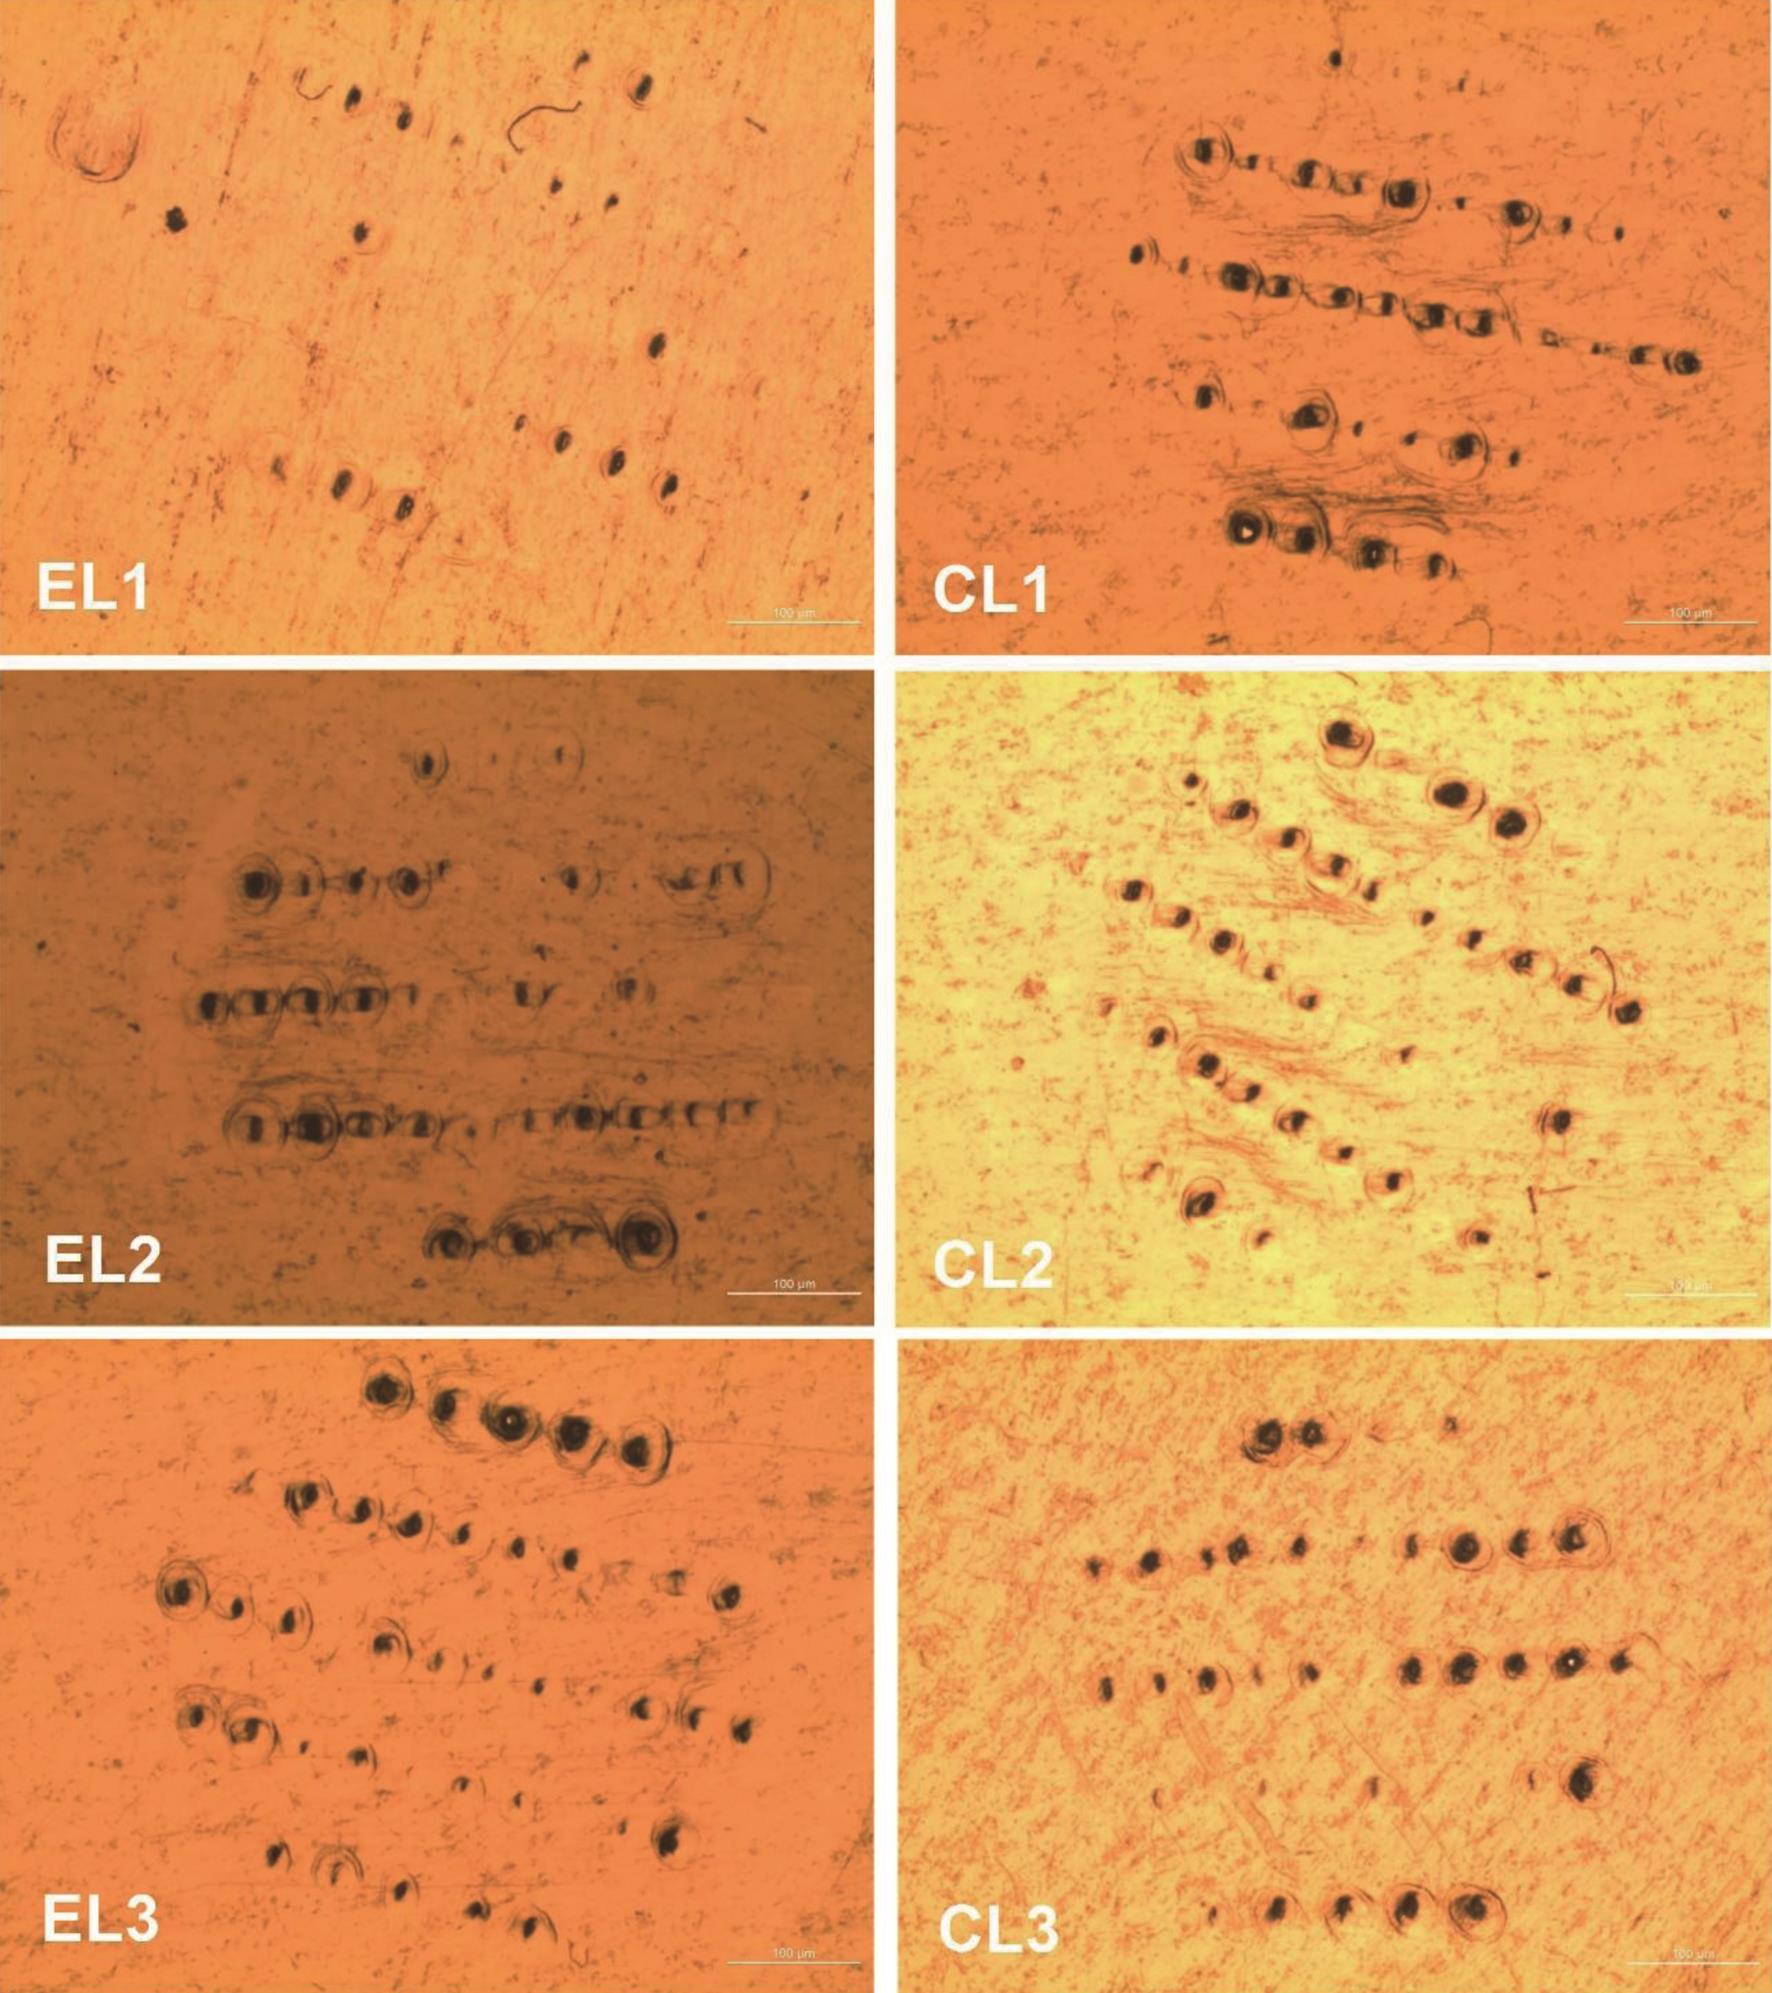 Stereo microscope images of the third layer of Parafilm under 42 N puncture force.